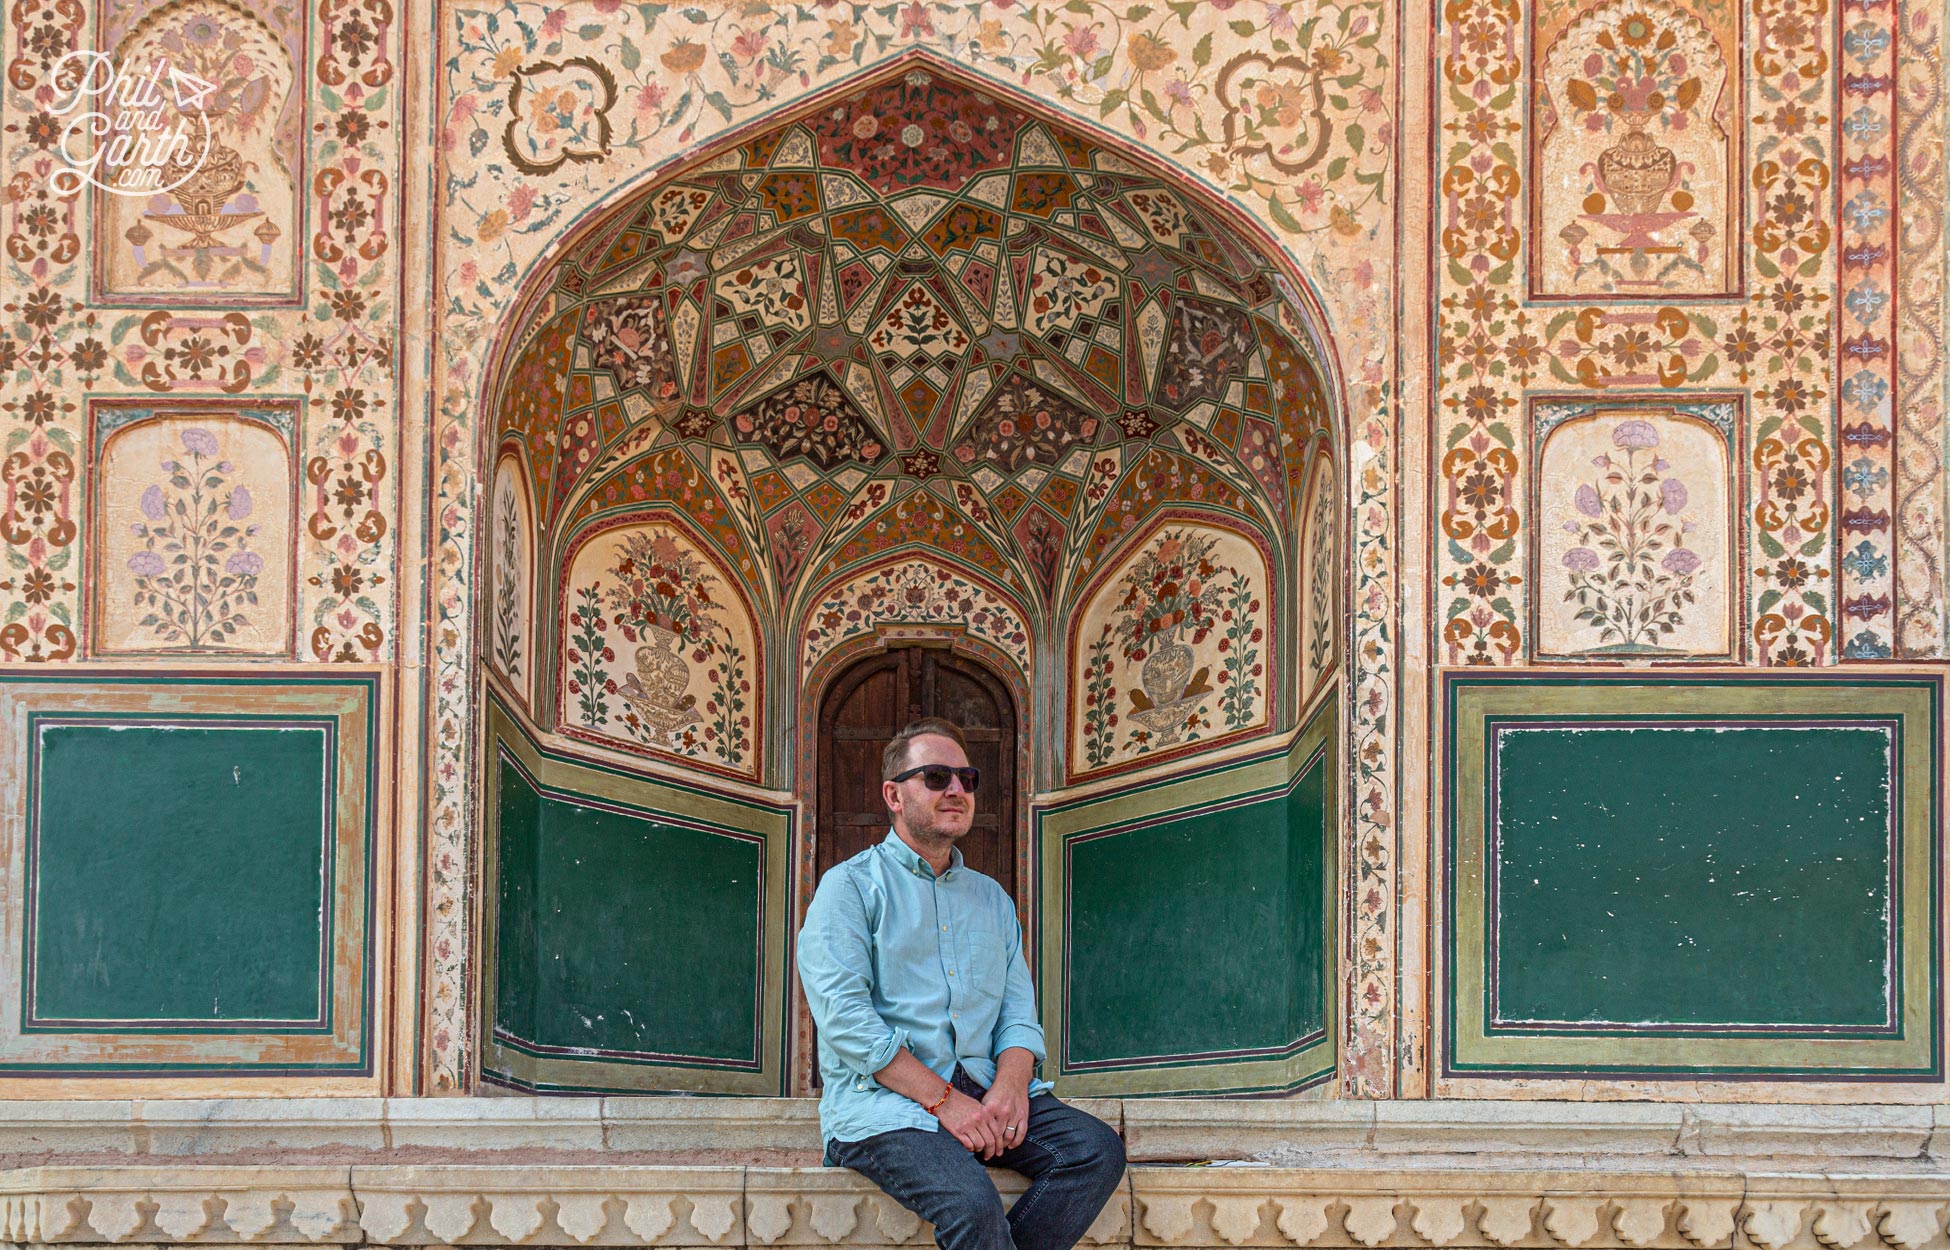 The Ganesh Pol gate is one of the most popular backdrops on Instagram - Garth trying to look casual